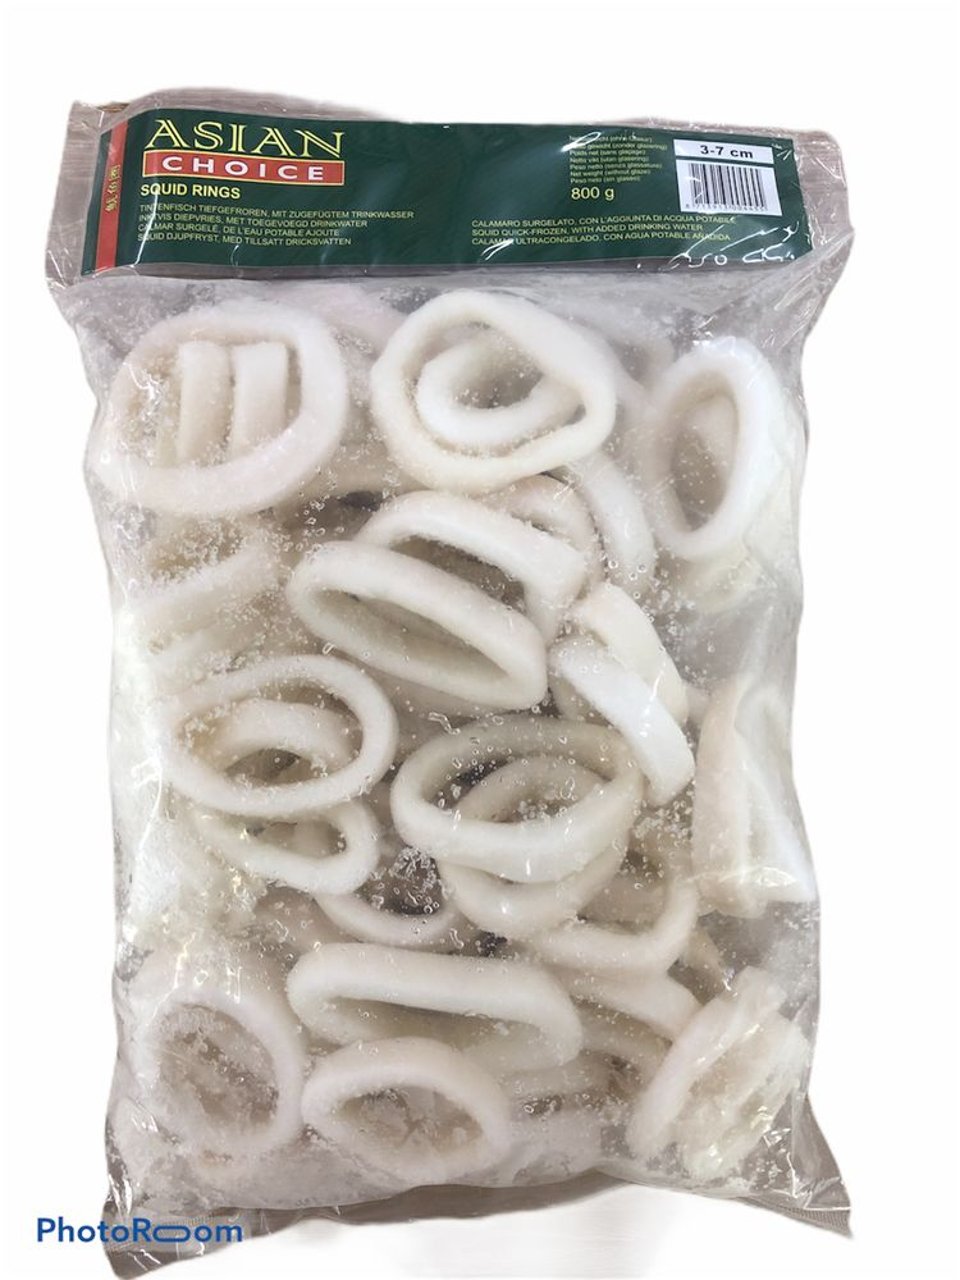 Asianchoice Squid Rings